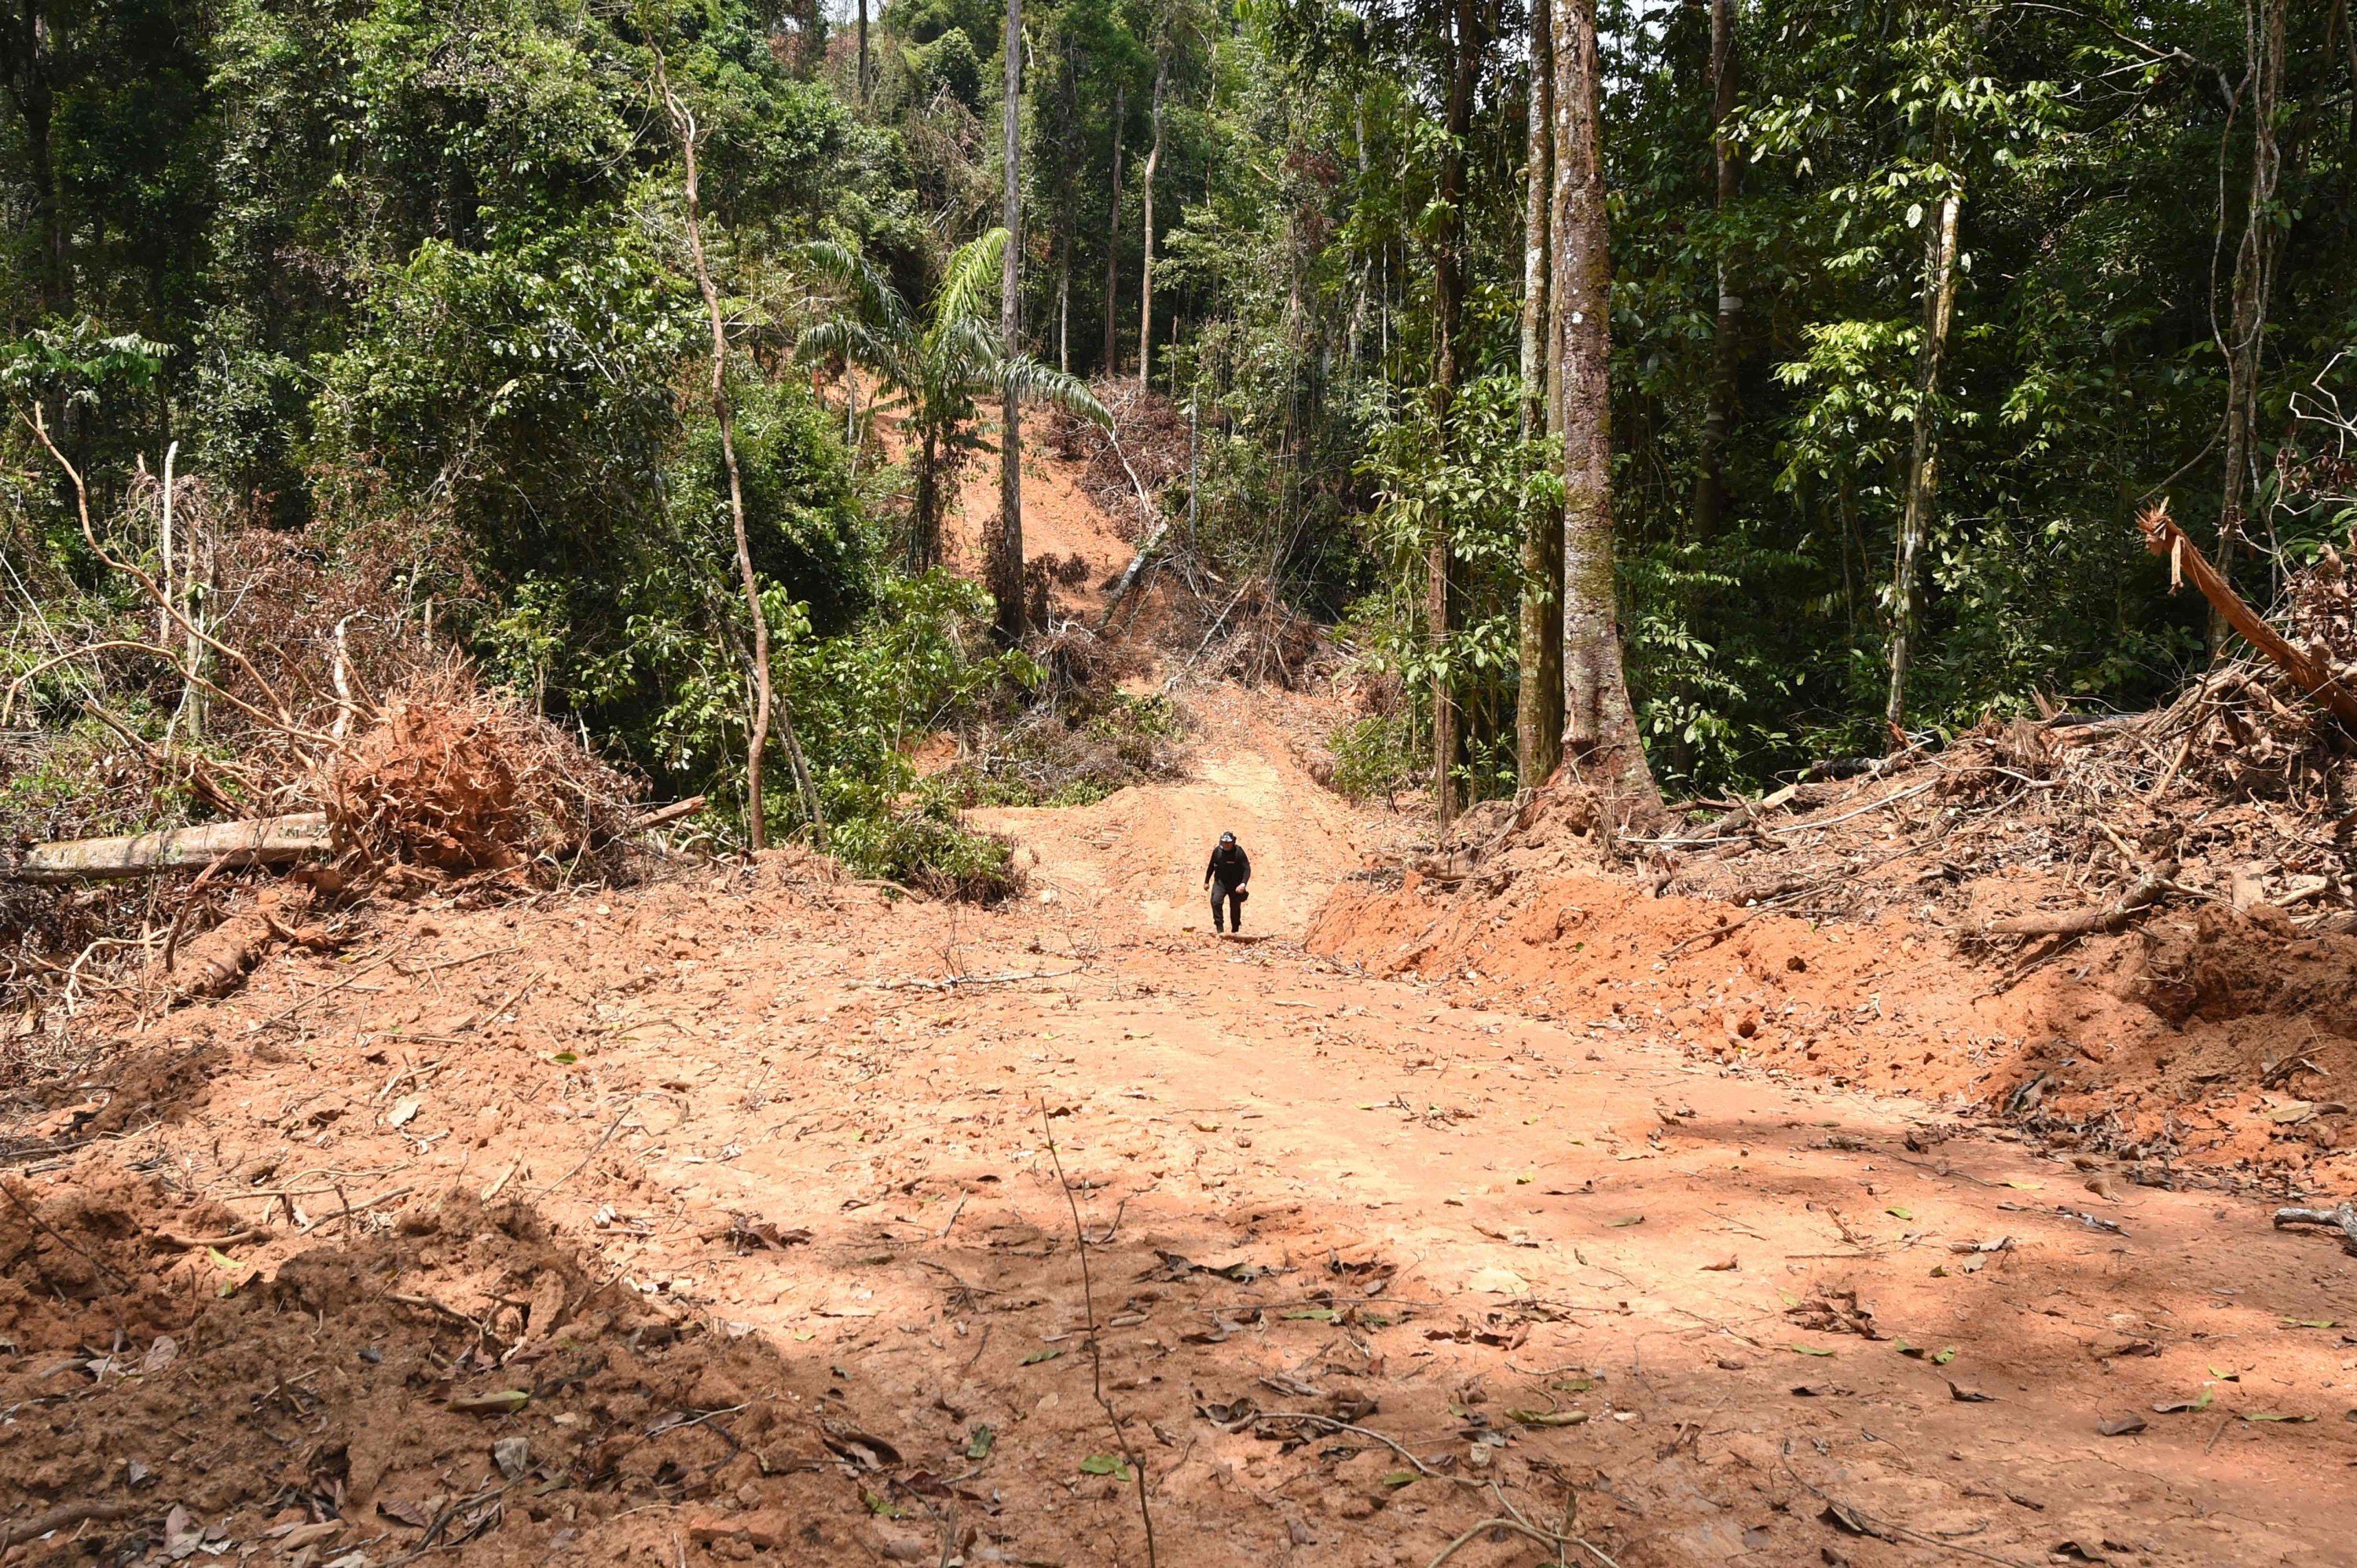 An official from Para State, northern Brazil, inspects a deforested area in the Amazon rain forest during surveillance in the municipality of Pacaja, 620 kilometers from the capital Belem, Brazil, Sep. 22, 2021. (AFP File Photo)